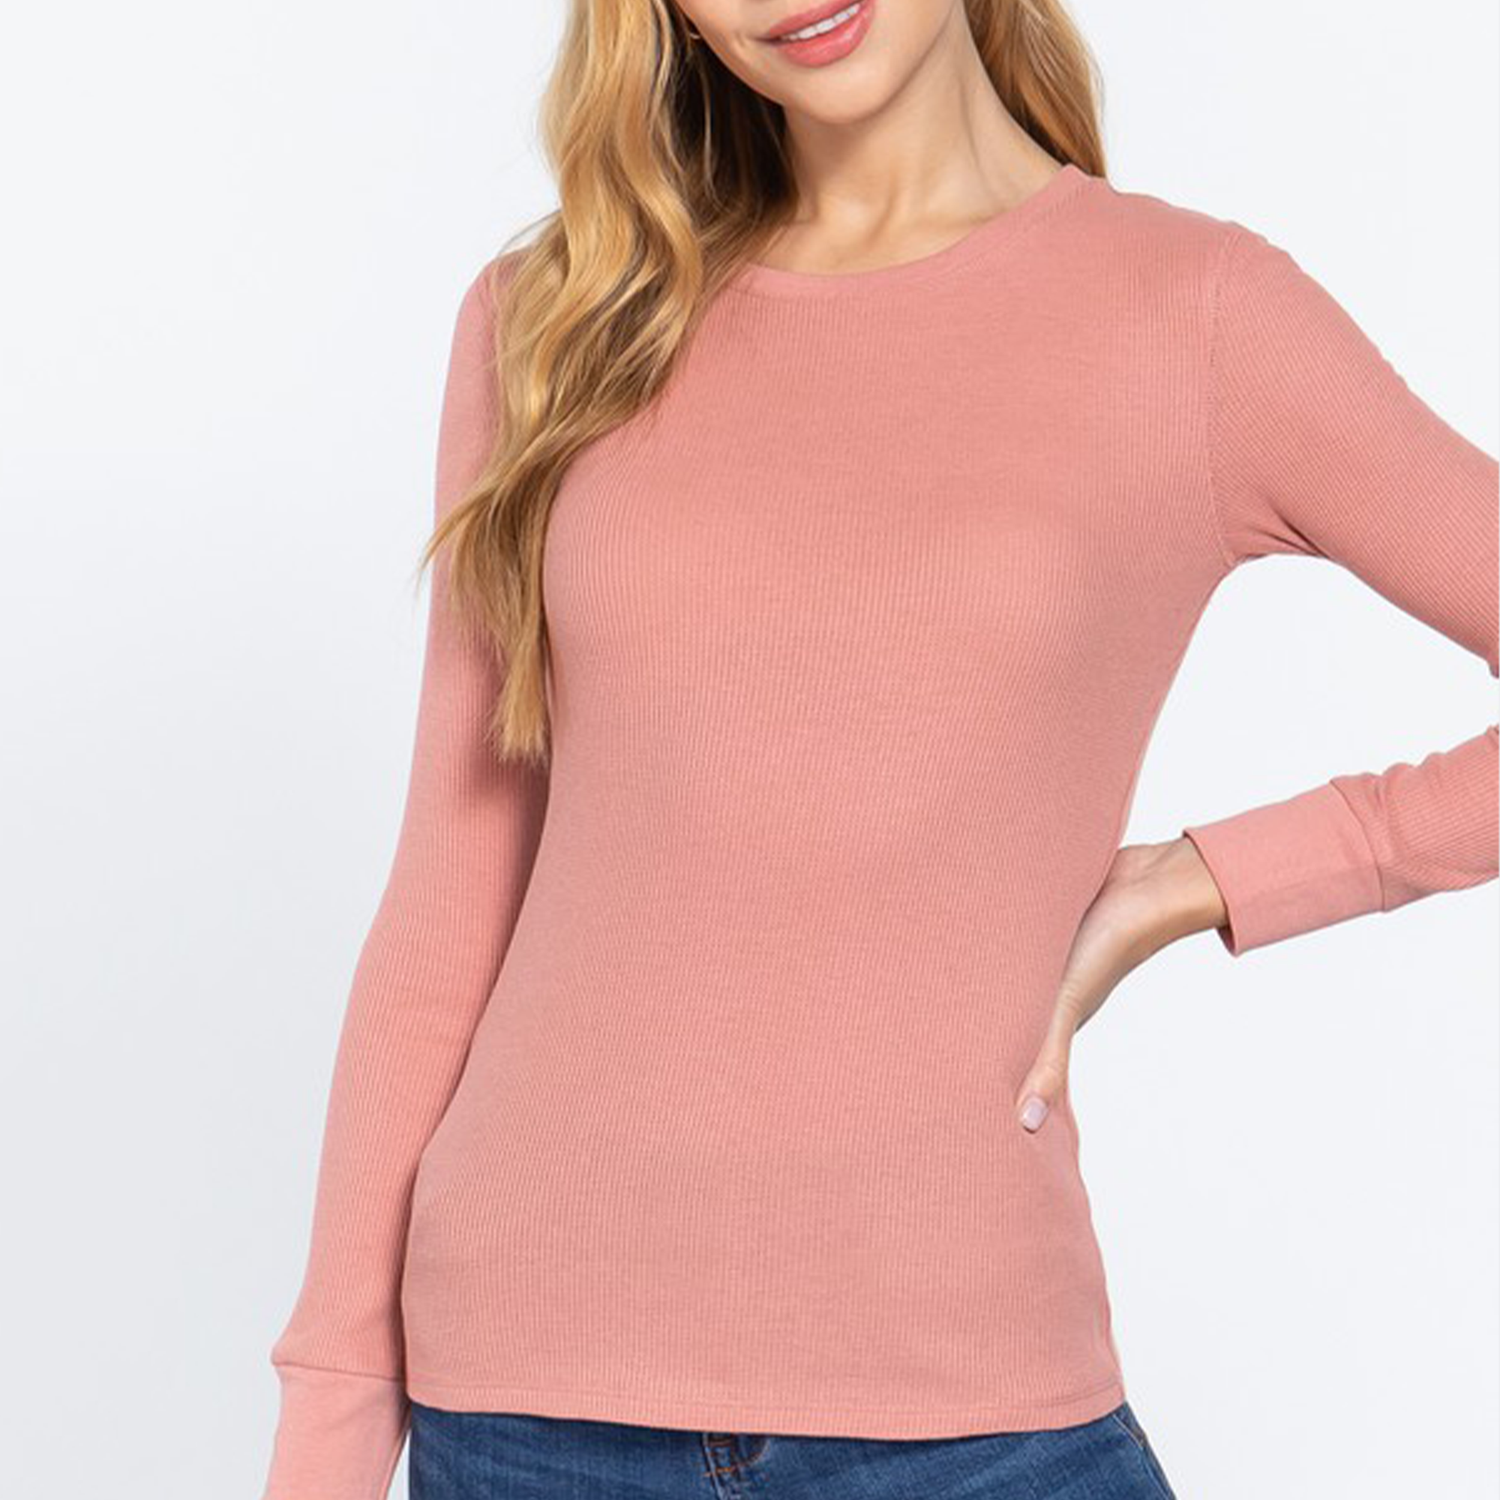 Long Sleeve Crew Thermal Knit Top. Looking for a new season refresh? This long sleeve top is the perfect option for cooler days. Offering more coverage without compromising on style, this top hugs your curves in all the right places, and we're obsessed